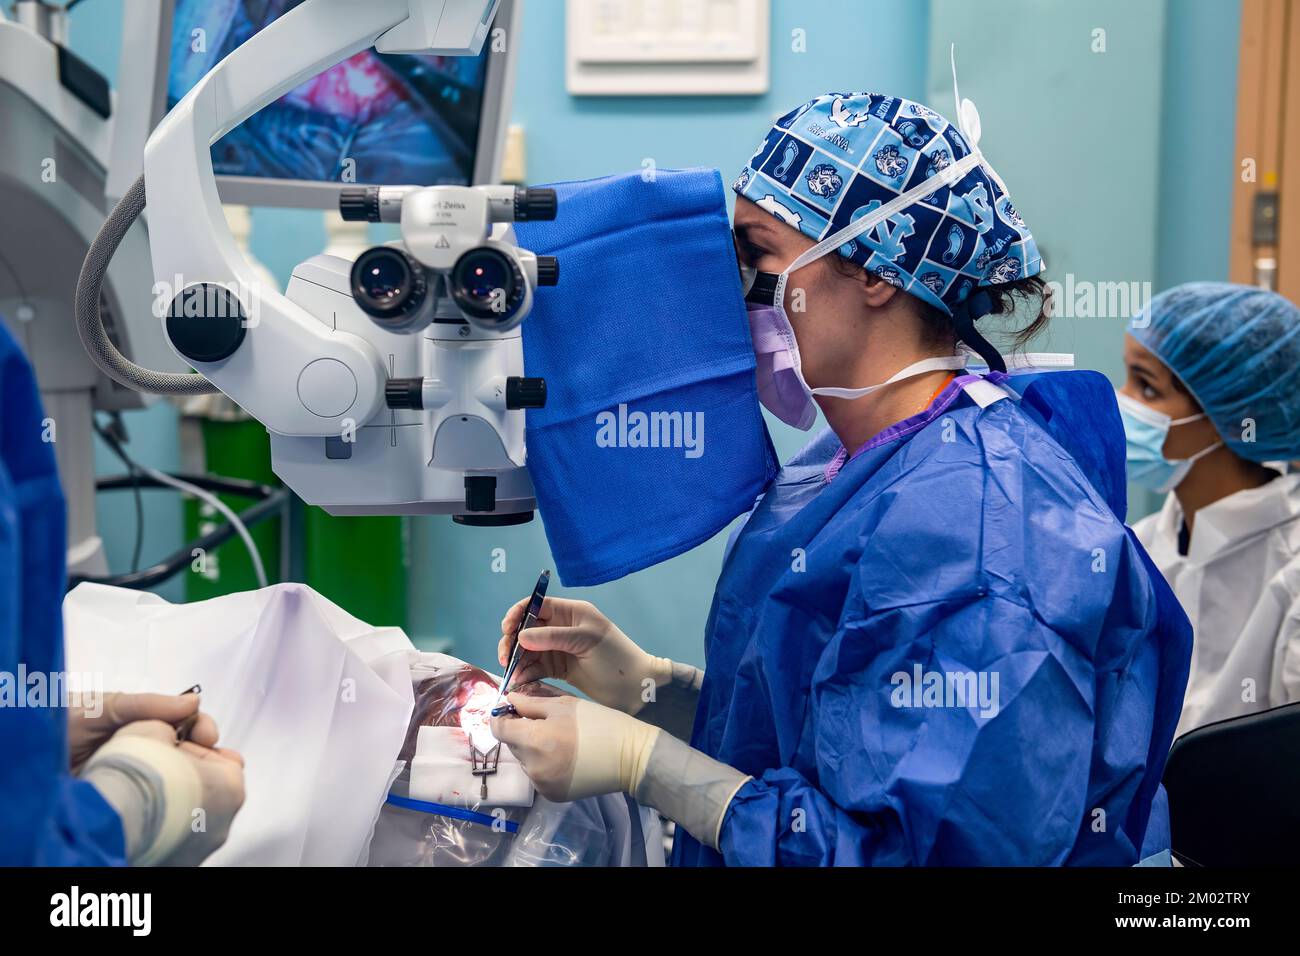 Doctor performing eye surgery on patient. Stock Photo